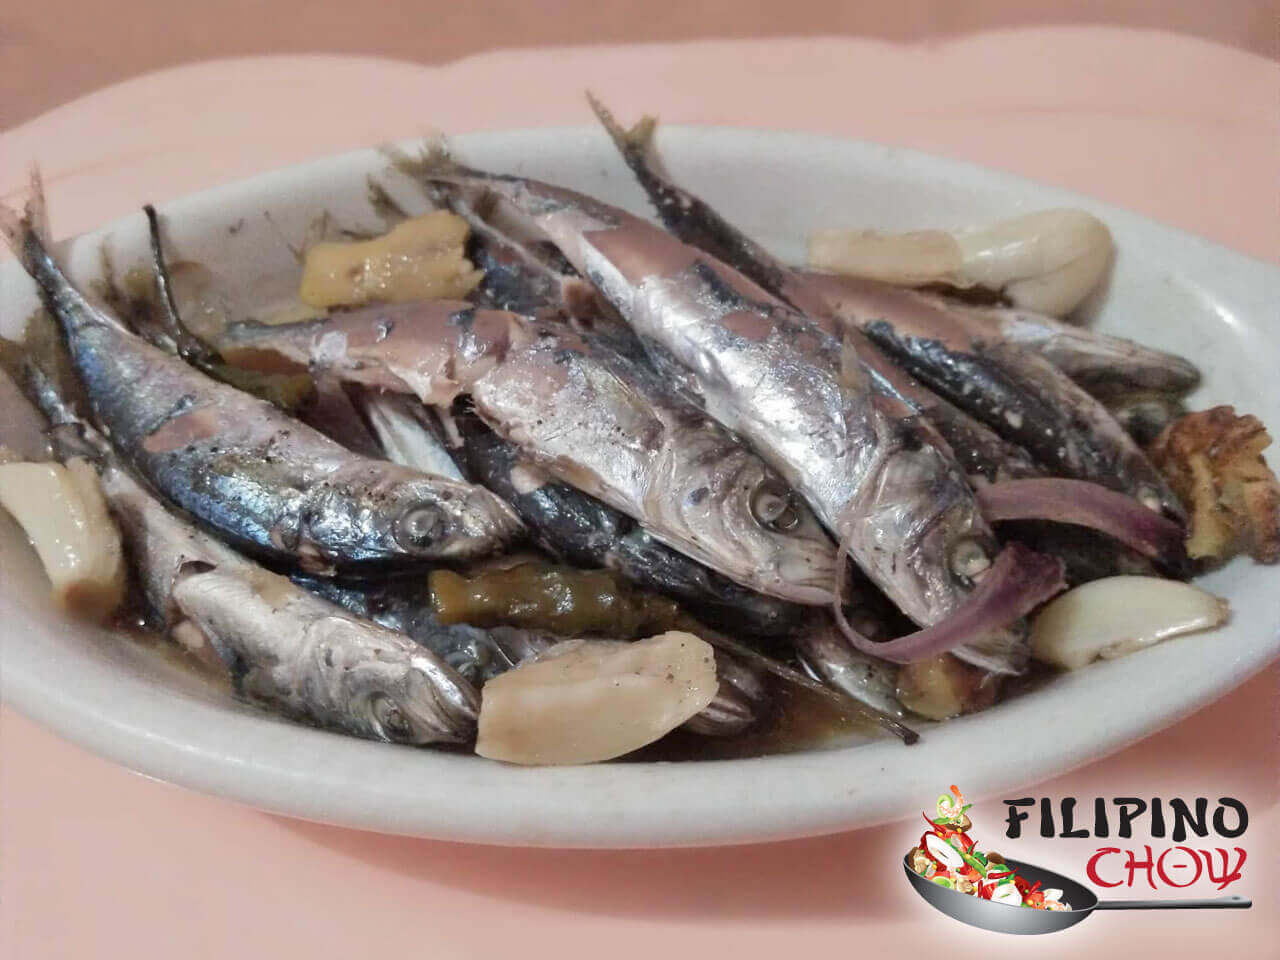 Paksiw Na Isda (Fish Poached in Vinegar and Ginger)